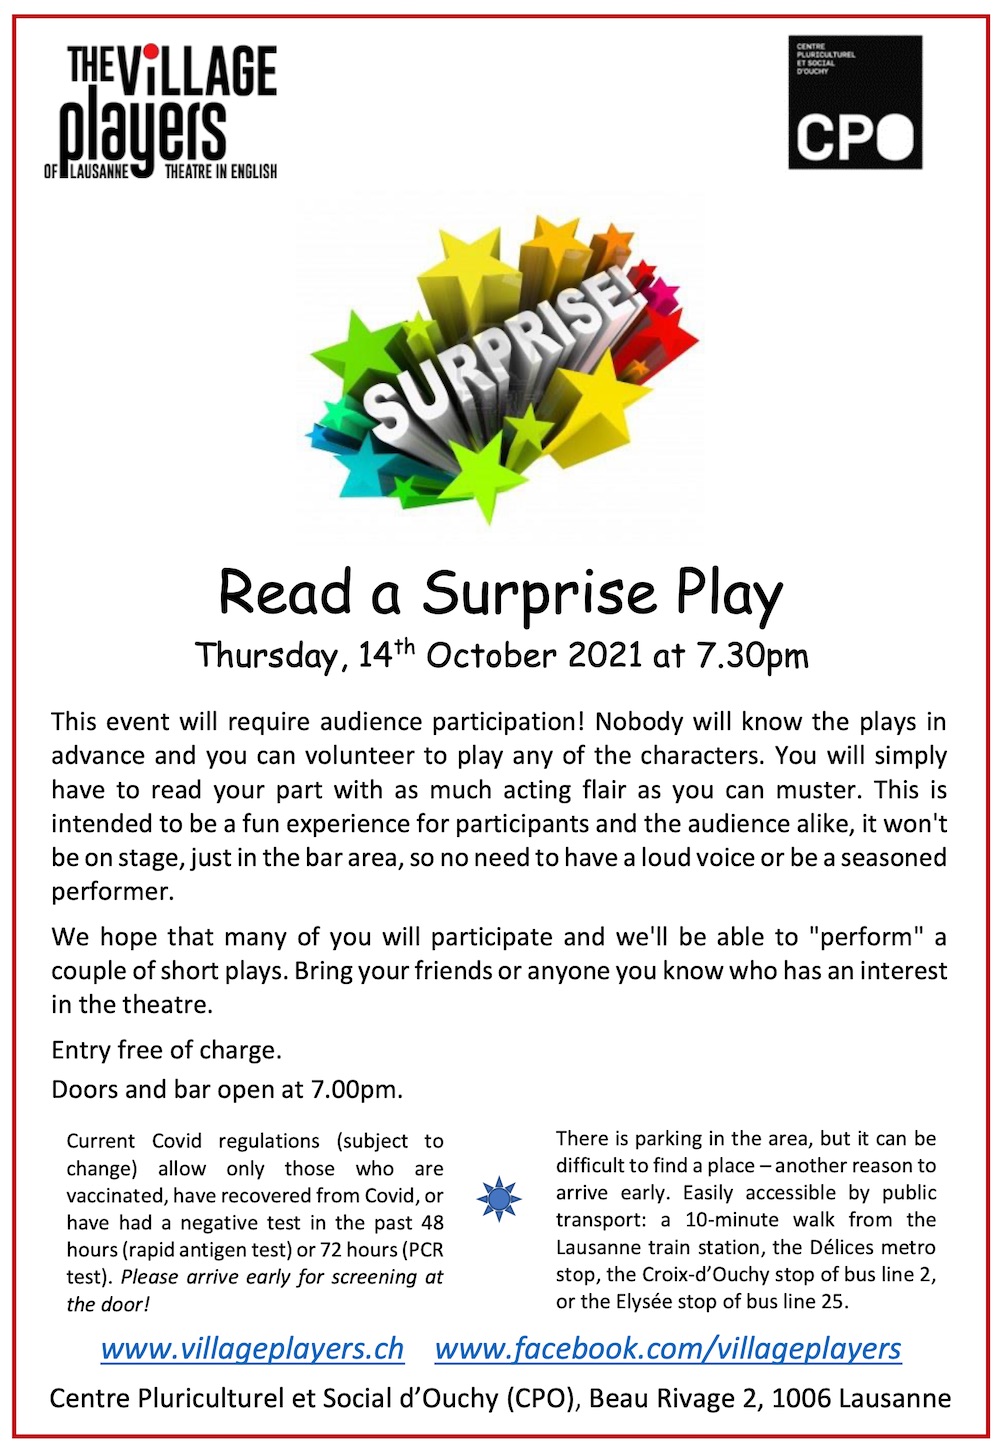 VILLAGE players surprise play oct2021